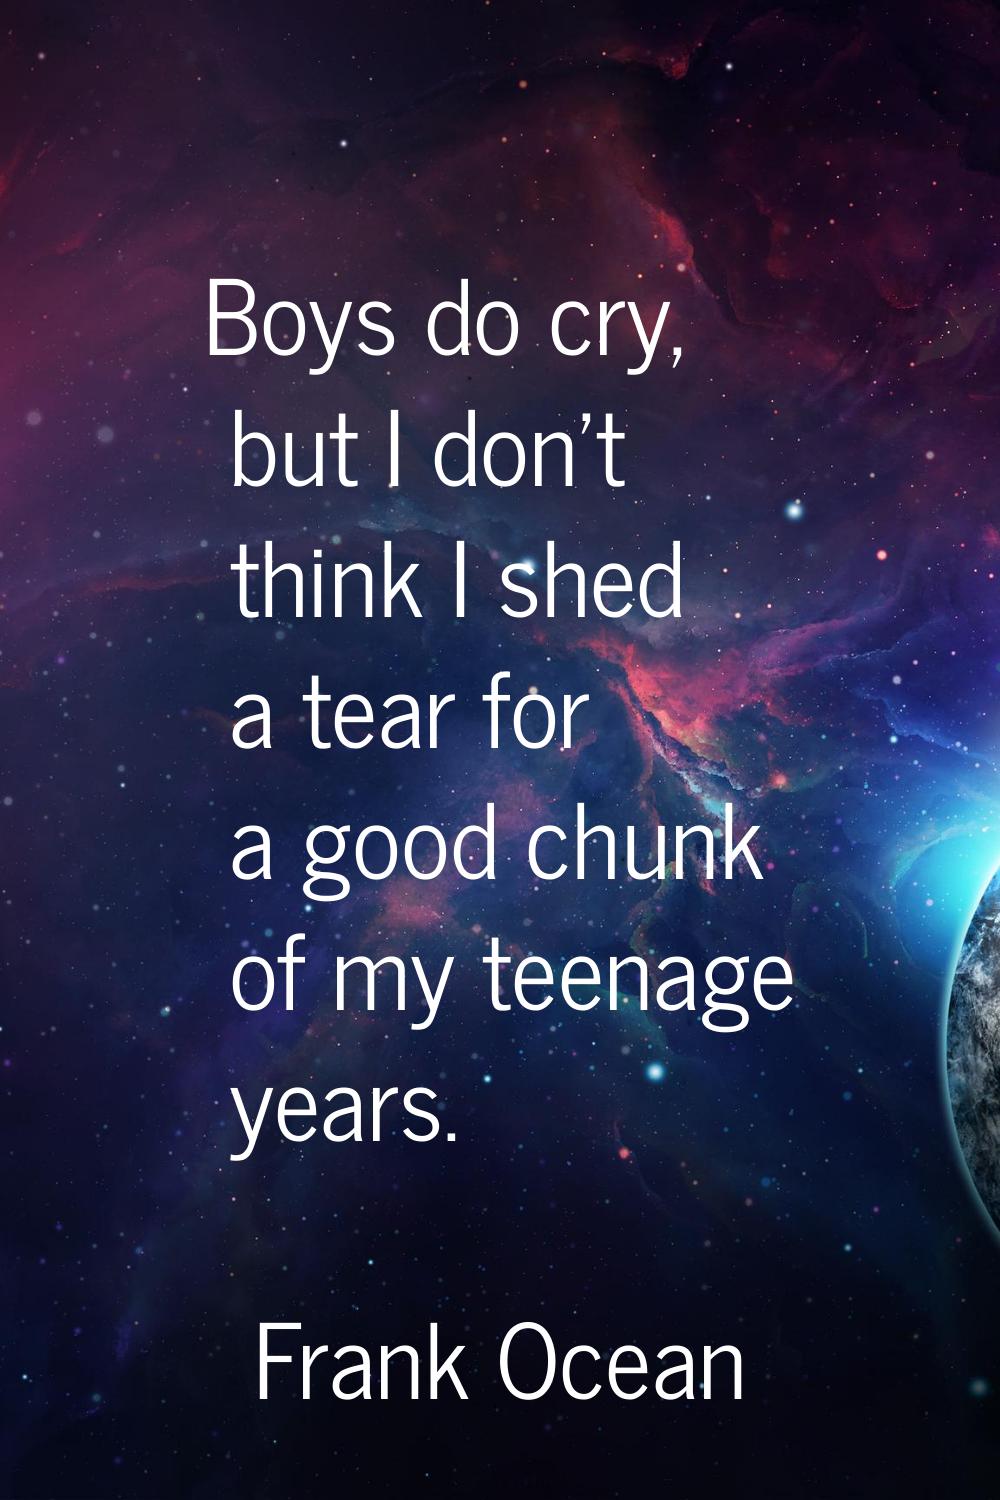 Boys do cry, but I don't think I shed a tear for a good chunk of my teenage years.